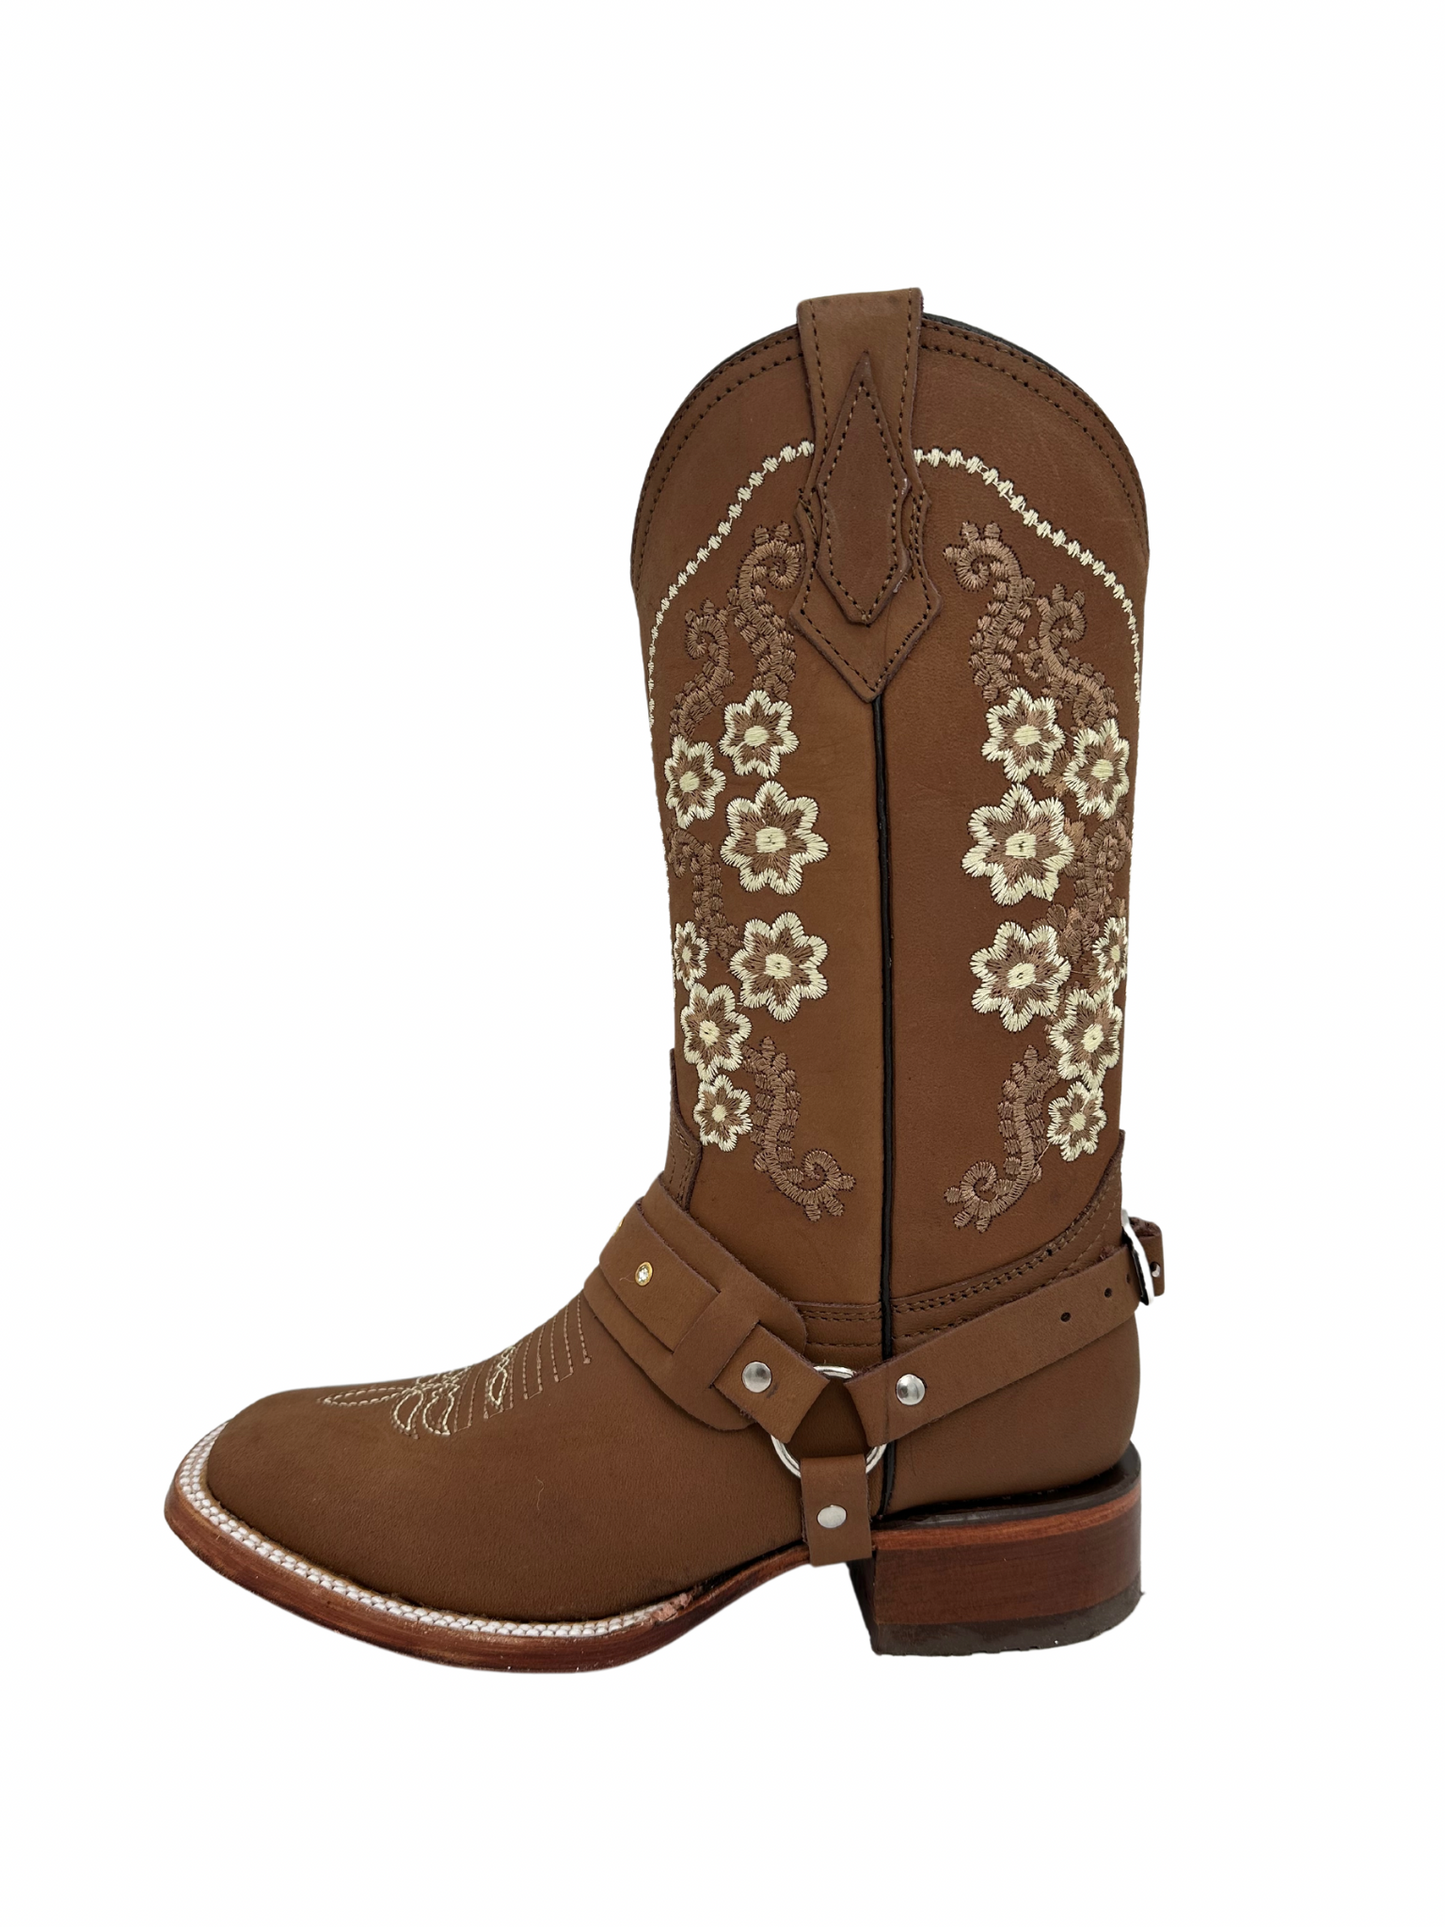 La Sierra Women's Tang Floral Strapped Square Toe Boot